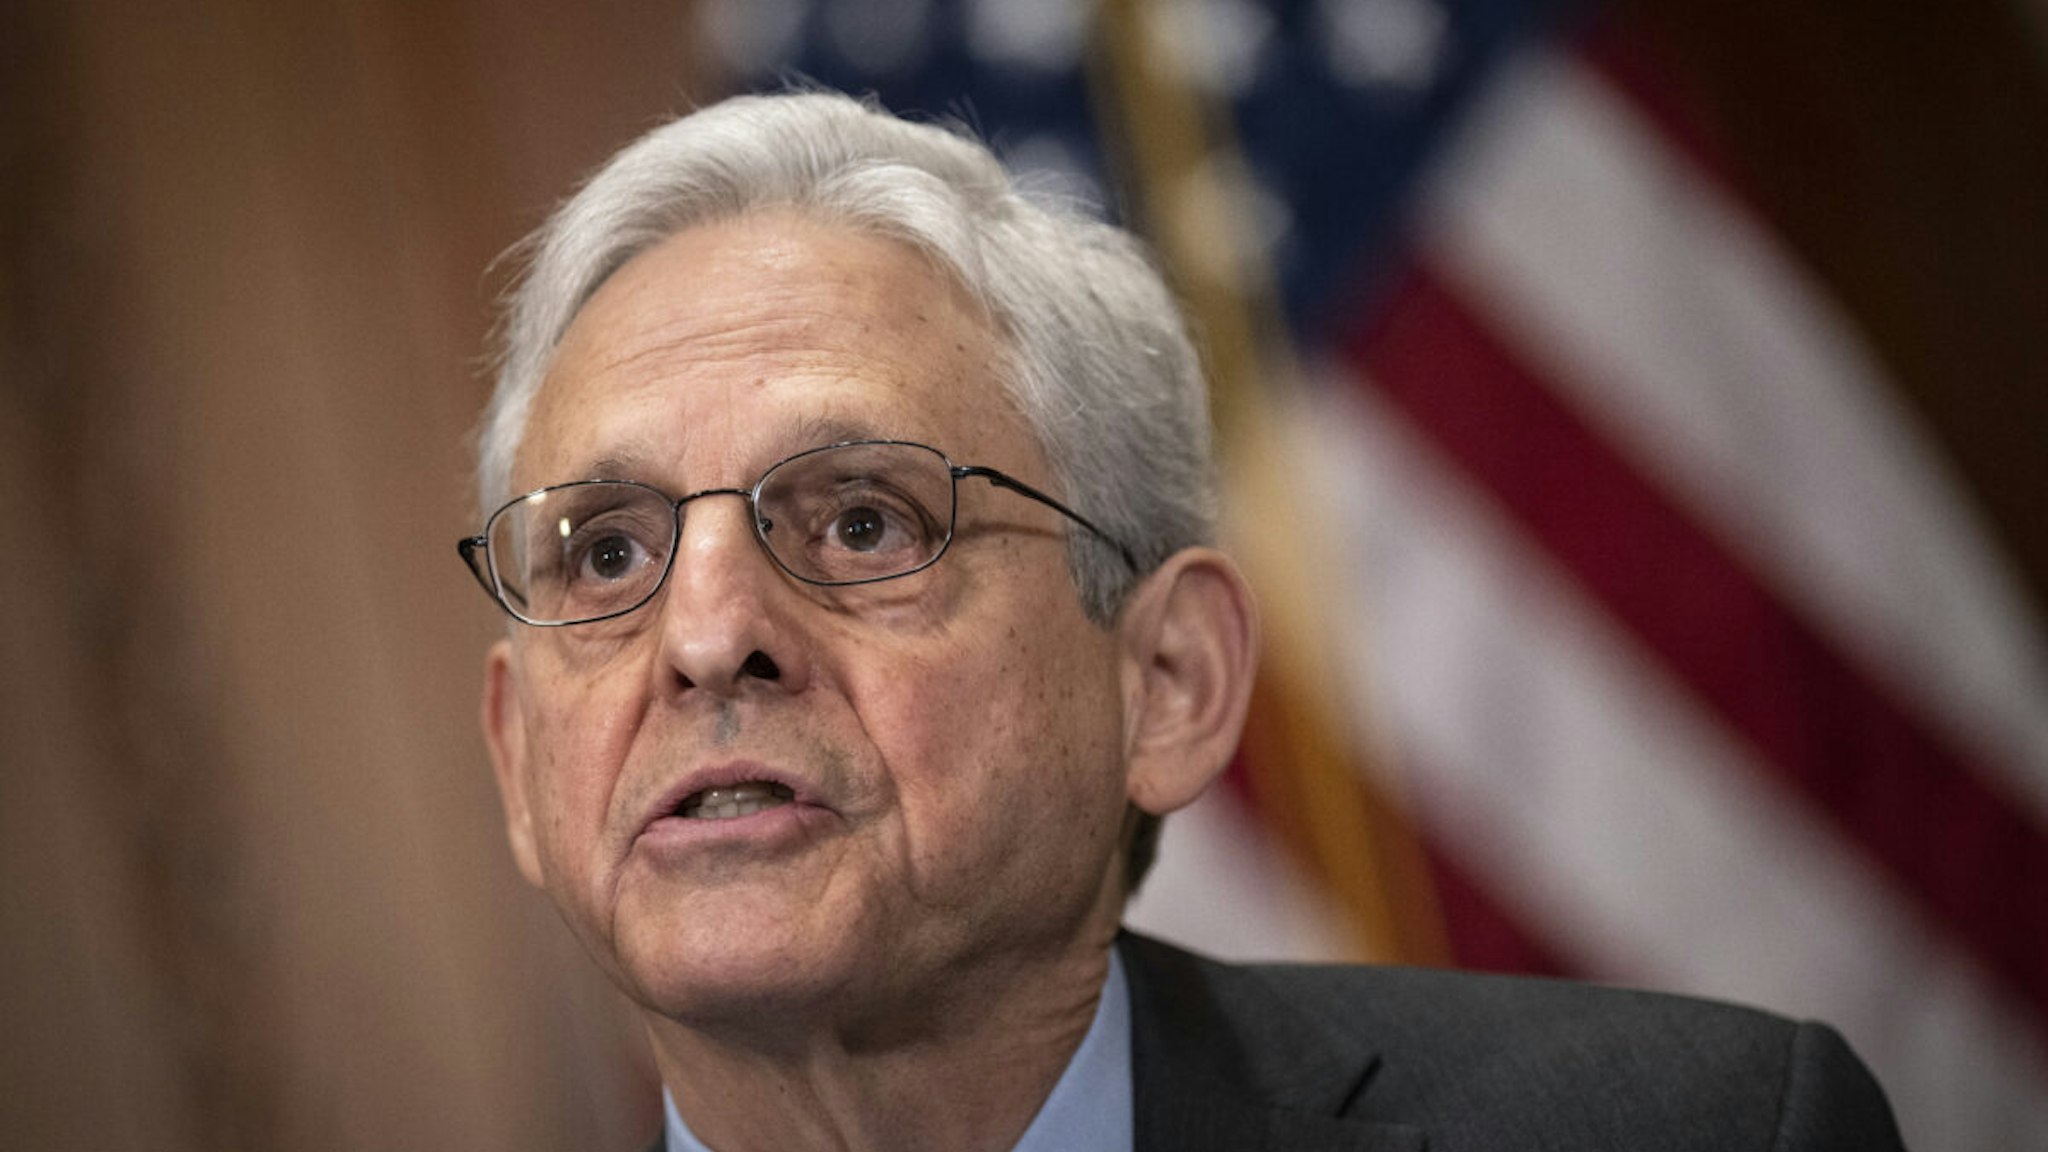 U.S. Attorney General Merrick Garland speaks during a meeting with Ukrainian Prosecutor General Andriy Kostin at the U.S. Department of Justice headquarters April 17, 2023 in Washington, DC.